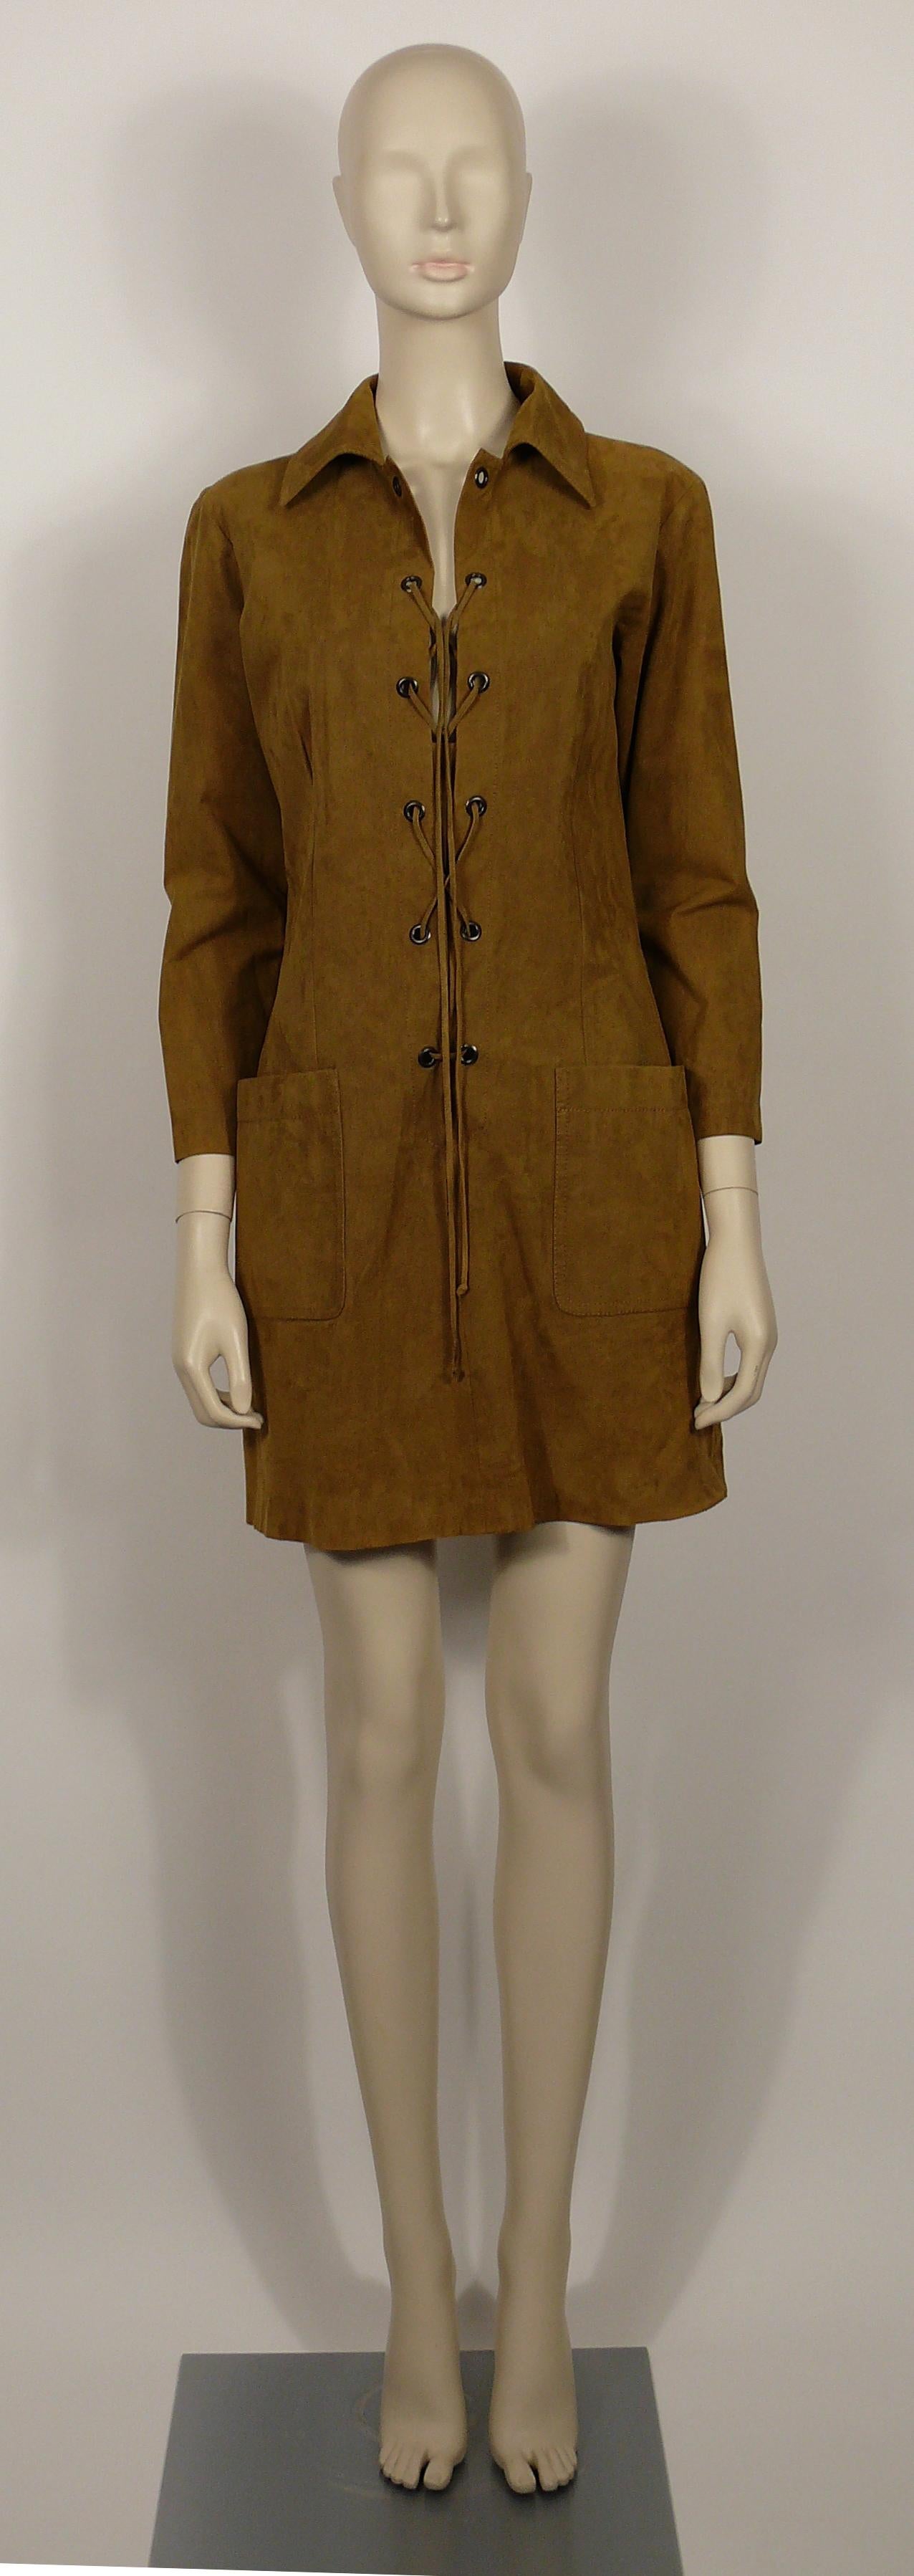 Yves Saint Laurent YSL Vintage Iconic Brown Safari Dress  In Good Condition For Sale In Nice, FR